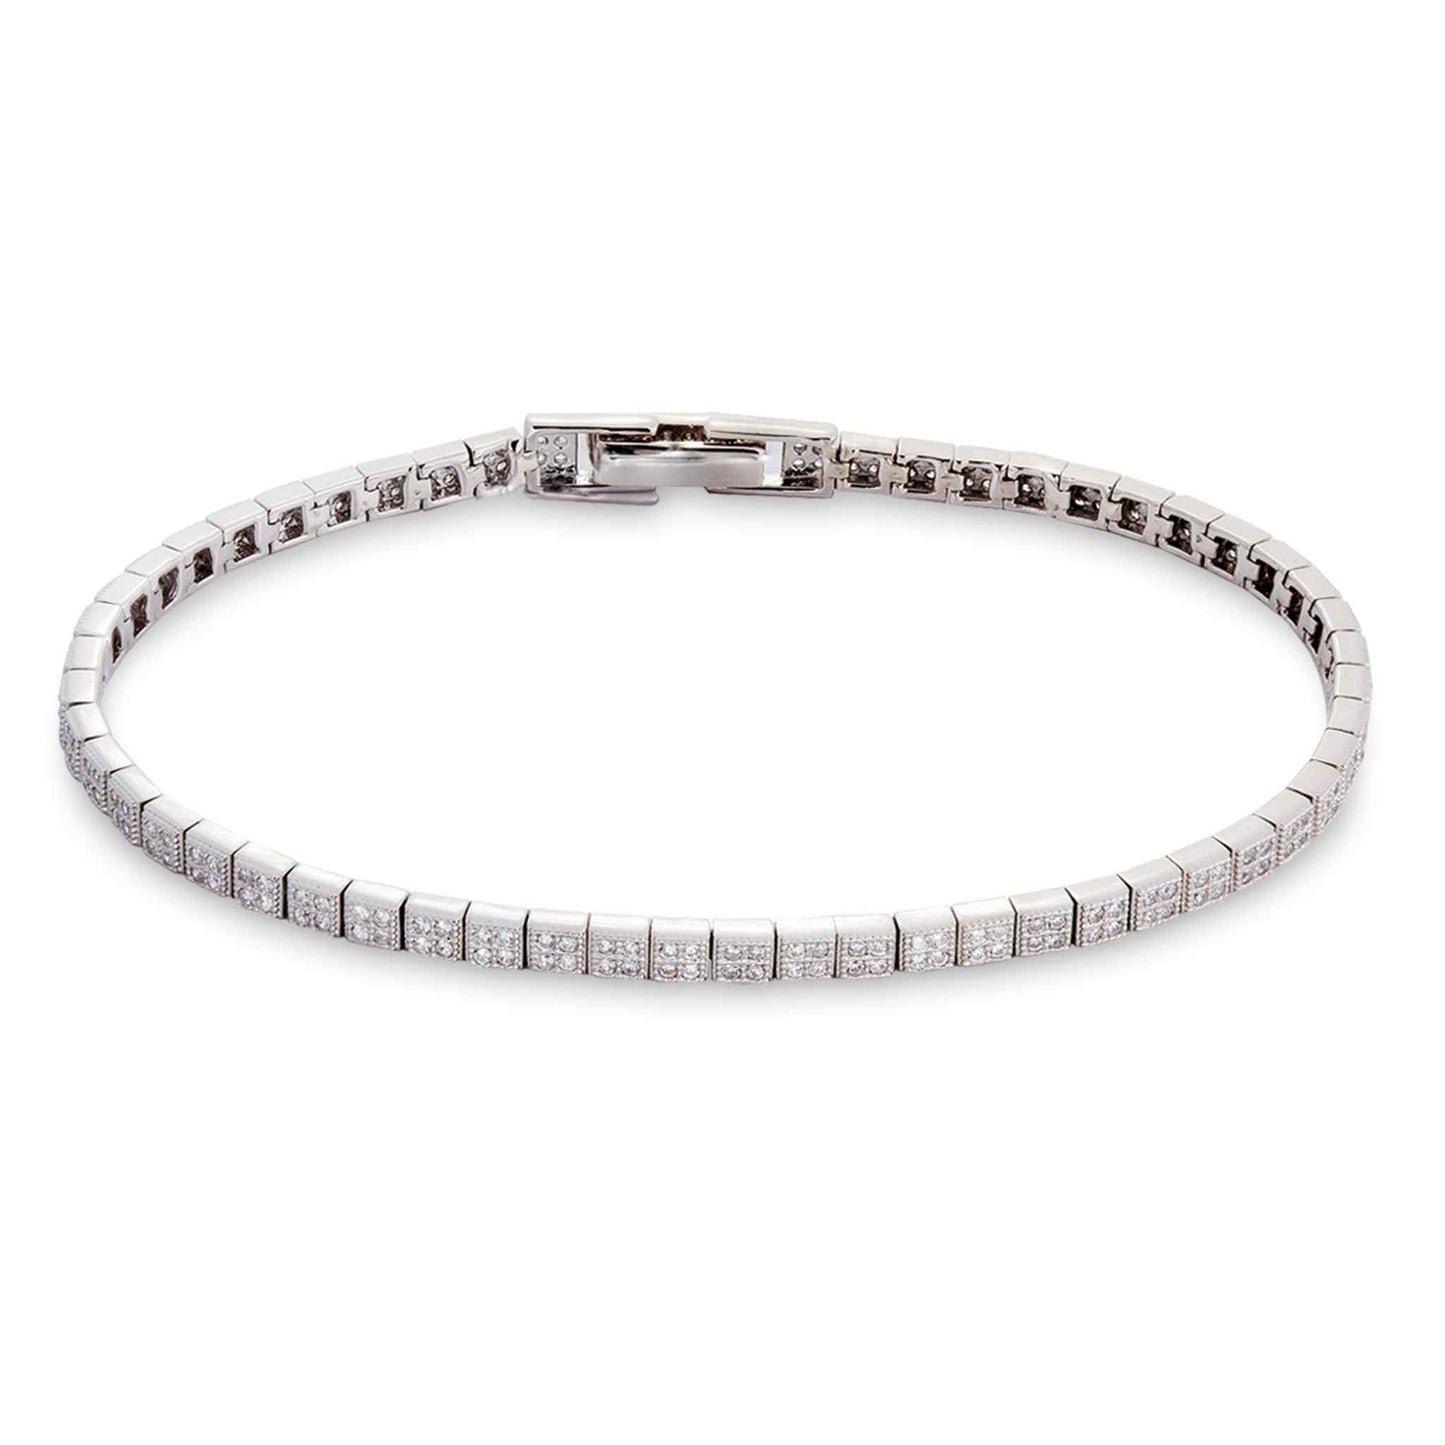 A squares bracelet with 230 simulated diamonds displayed on a neutral white background.